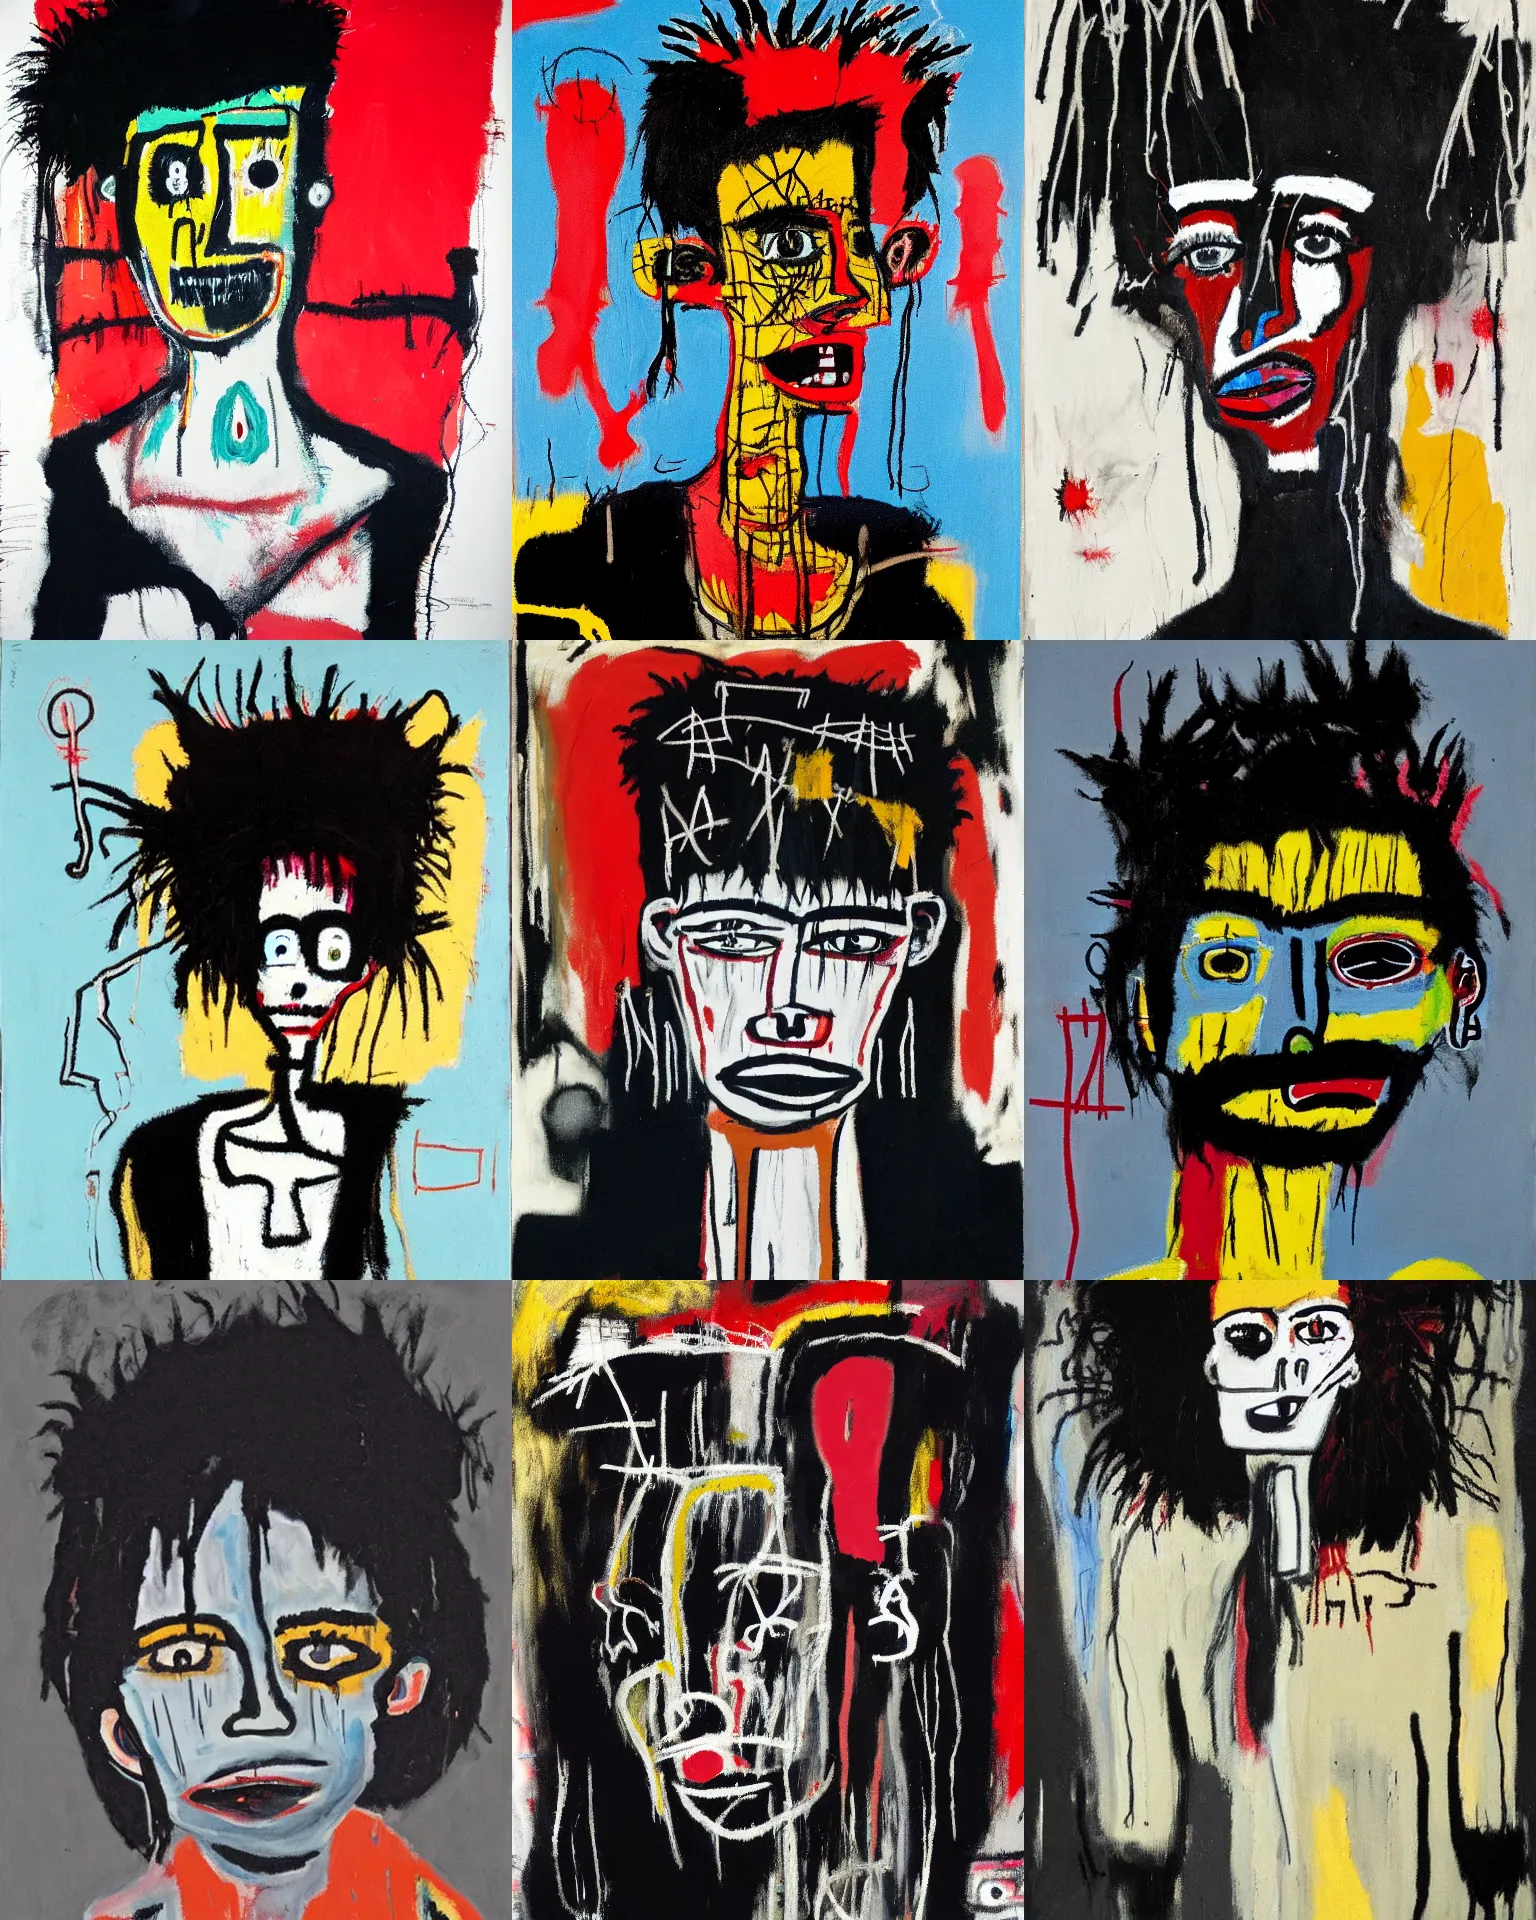 Prompt: A goth portrait painted by Jean-Michel Basquiat. Her hair is dark brown and cut into a short, messy pixie cut. She has a slightly rounded face, with a pointed chin, large entirely-black eyes, and a small nose. She is wearing a black tank top, a black leather jacket, a black knee-length skirt, a black choker, and black leather boots.